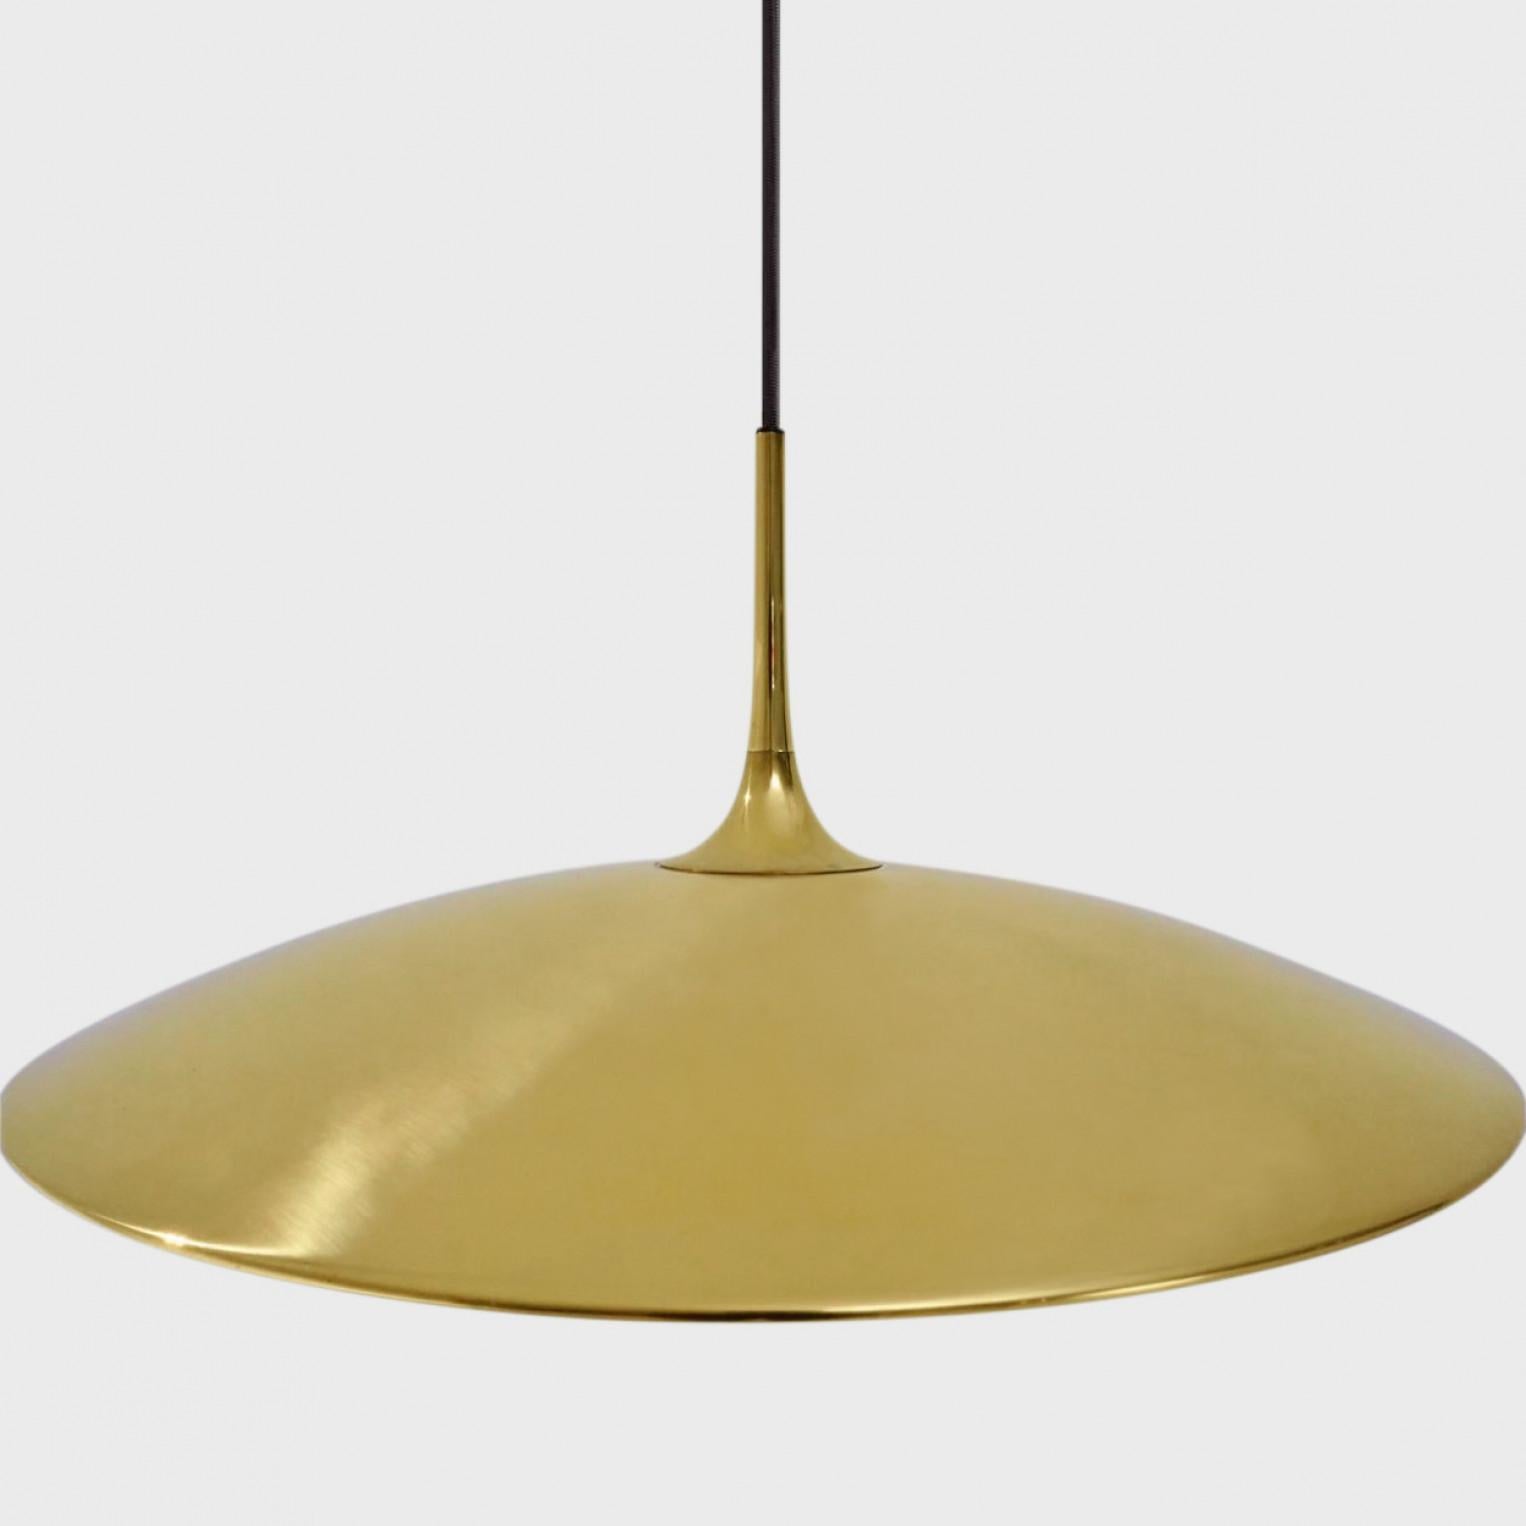 Fantastic pendant light Onos-55 Double Pull  by Florian Schulz, Germany, Europe. Design period: 1970-1979, production period: 2022.

Two brass polished unlacquered pendants suspended with their own brass ball counter balance. One canopy supports